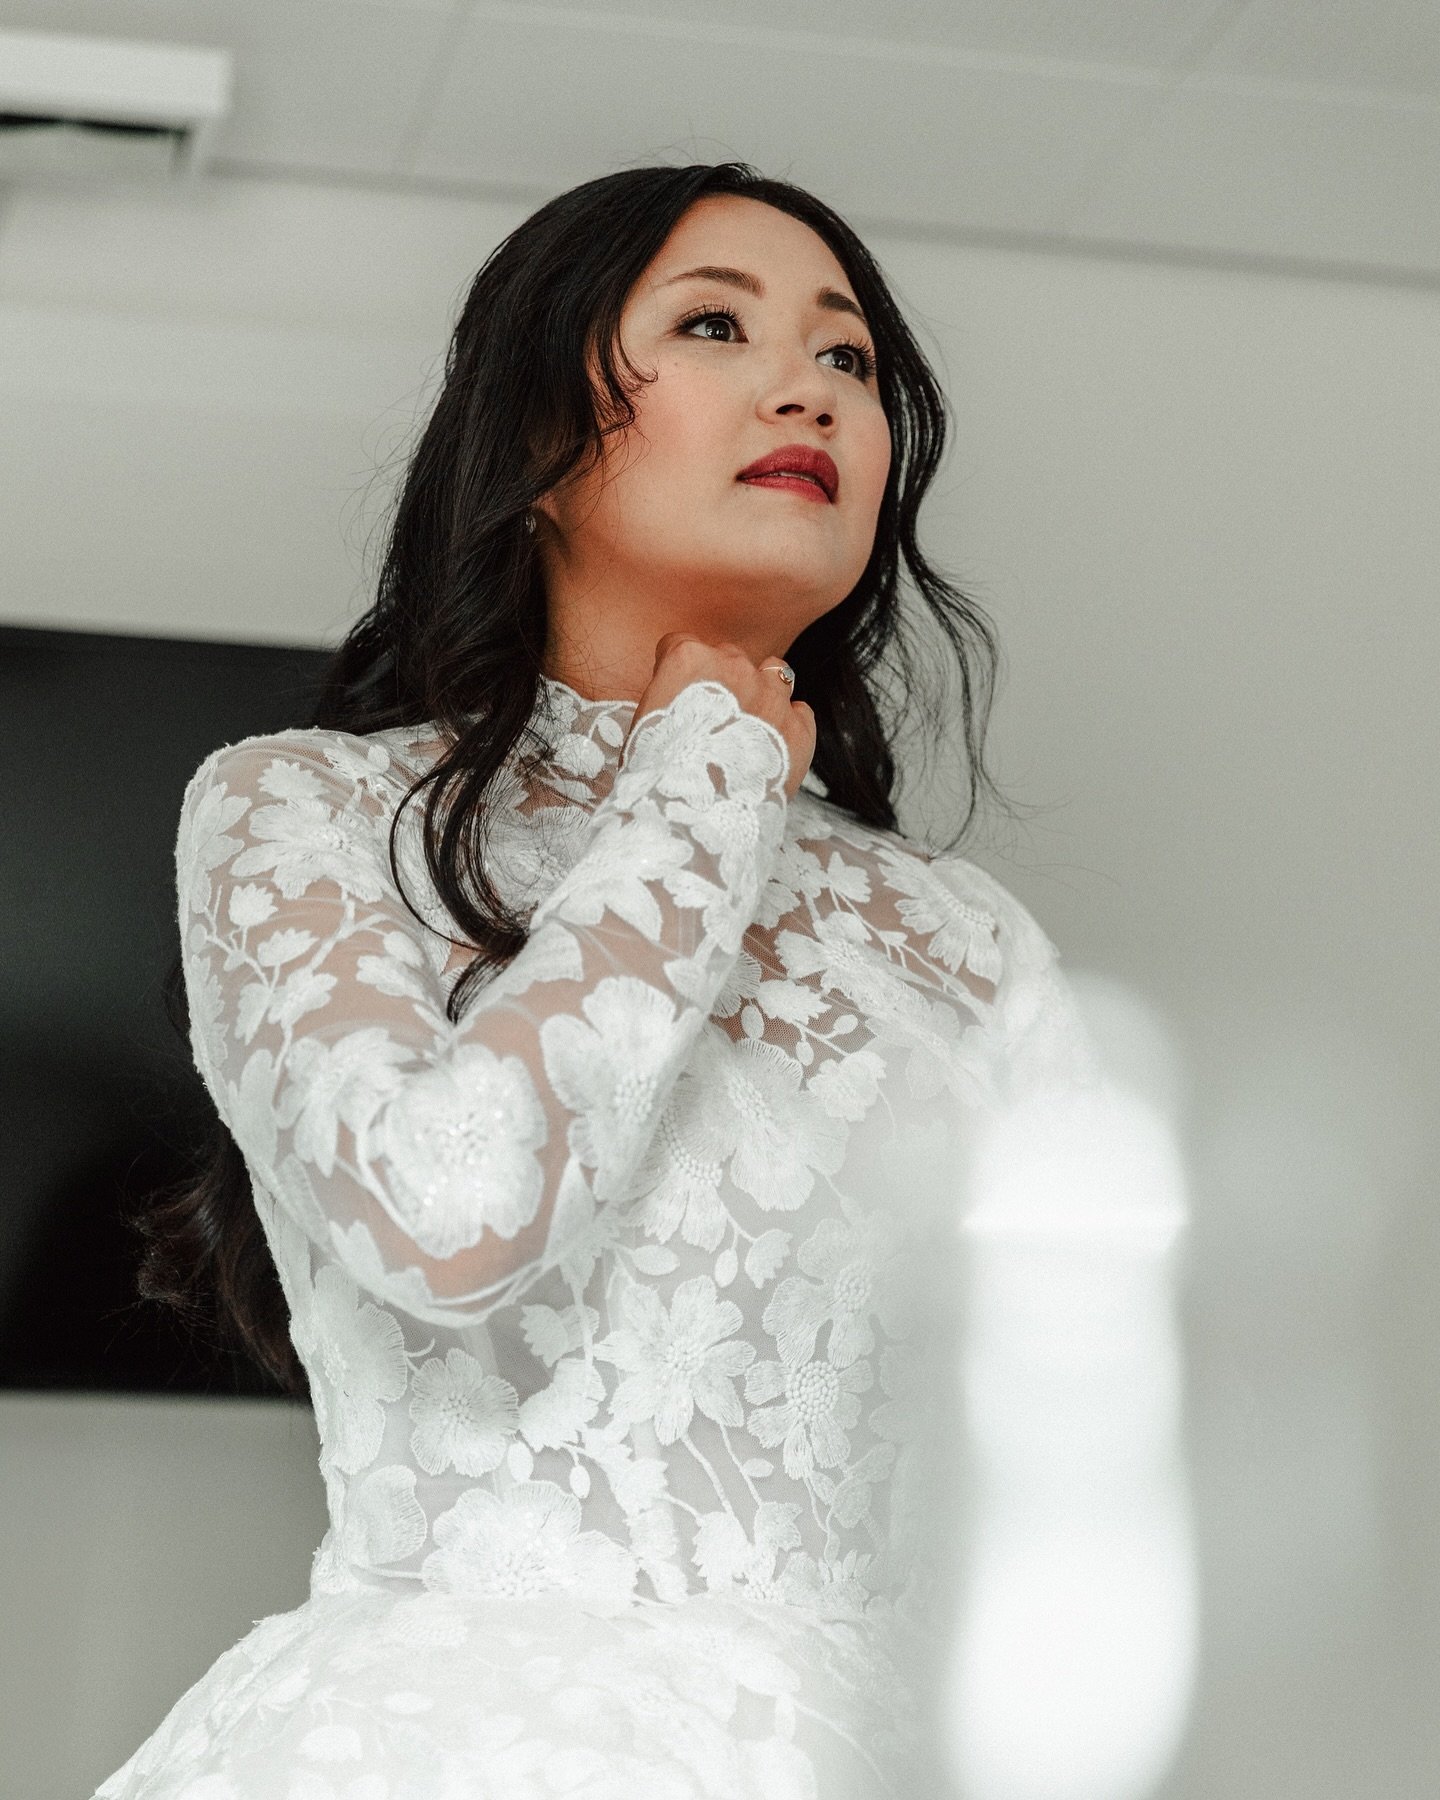 Beautiful last-minute preps before the wedding ceremony. The type of documentary photos we absolutely love! 🥰 Can&rsquo;t wait to photograph tons of those this summer! Still have a few last autumn dates available. Please don&rsquo;t hesitate to cont